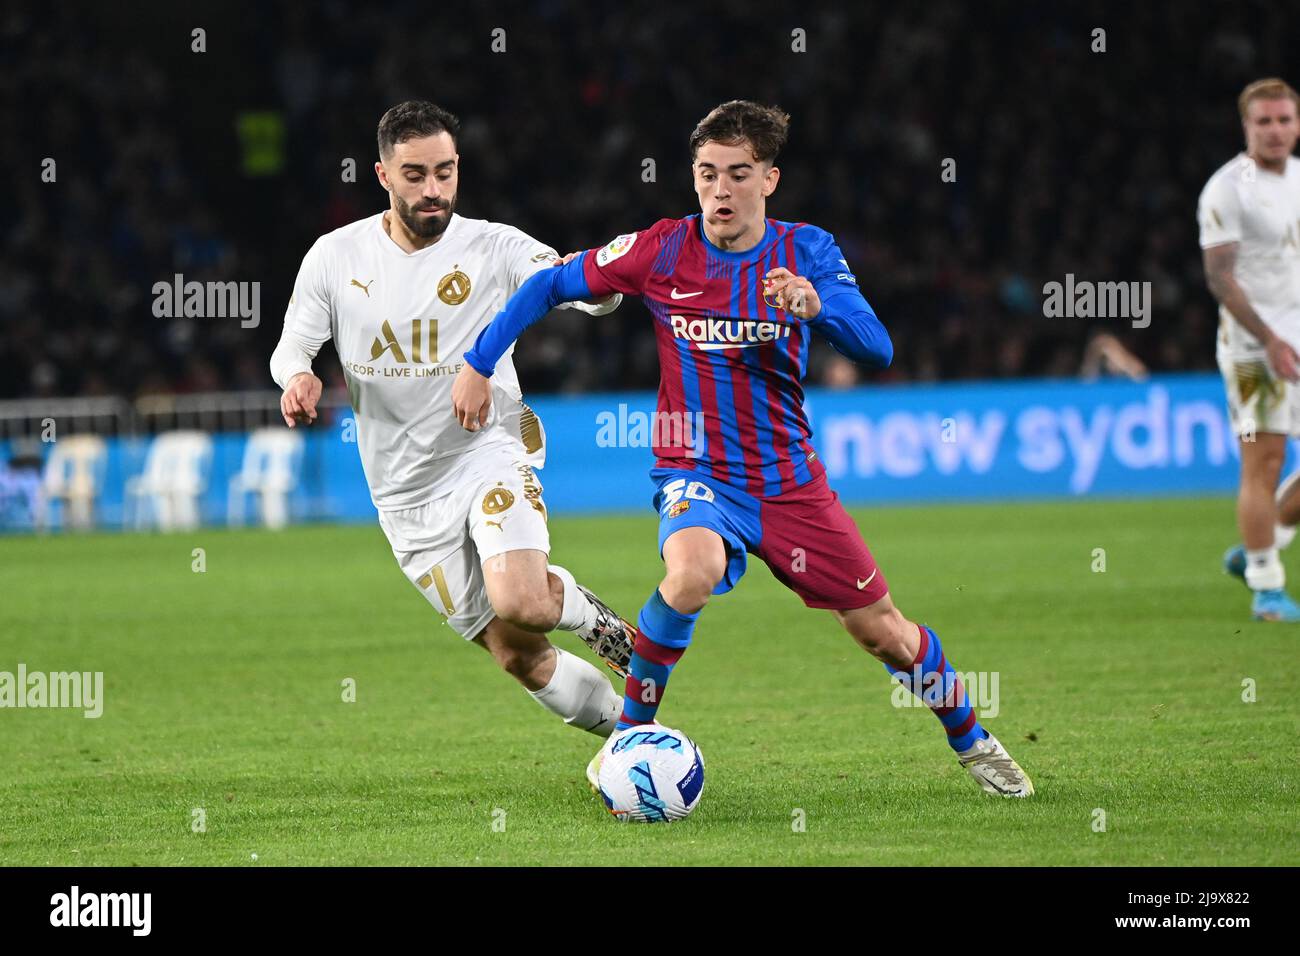 Sydney Olympic Park, Australia. 25th May, 2022. Anthony Caceres (L) of A-Leagues All Stars team and Pablo Martín Páez Gavira (R) in action during the match between FC Barcelona and the A-League All Stars at Accor Stadium. (Final score; FC Barcelona 3:2 A-Leagues All Stars). Credit: SOPA Images Limited/Alamy Live News Stock Photo